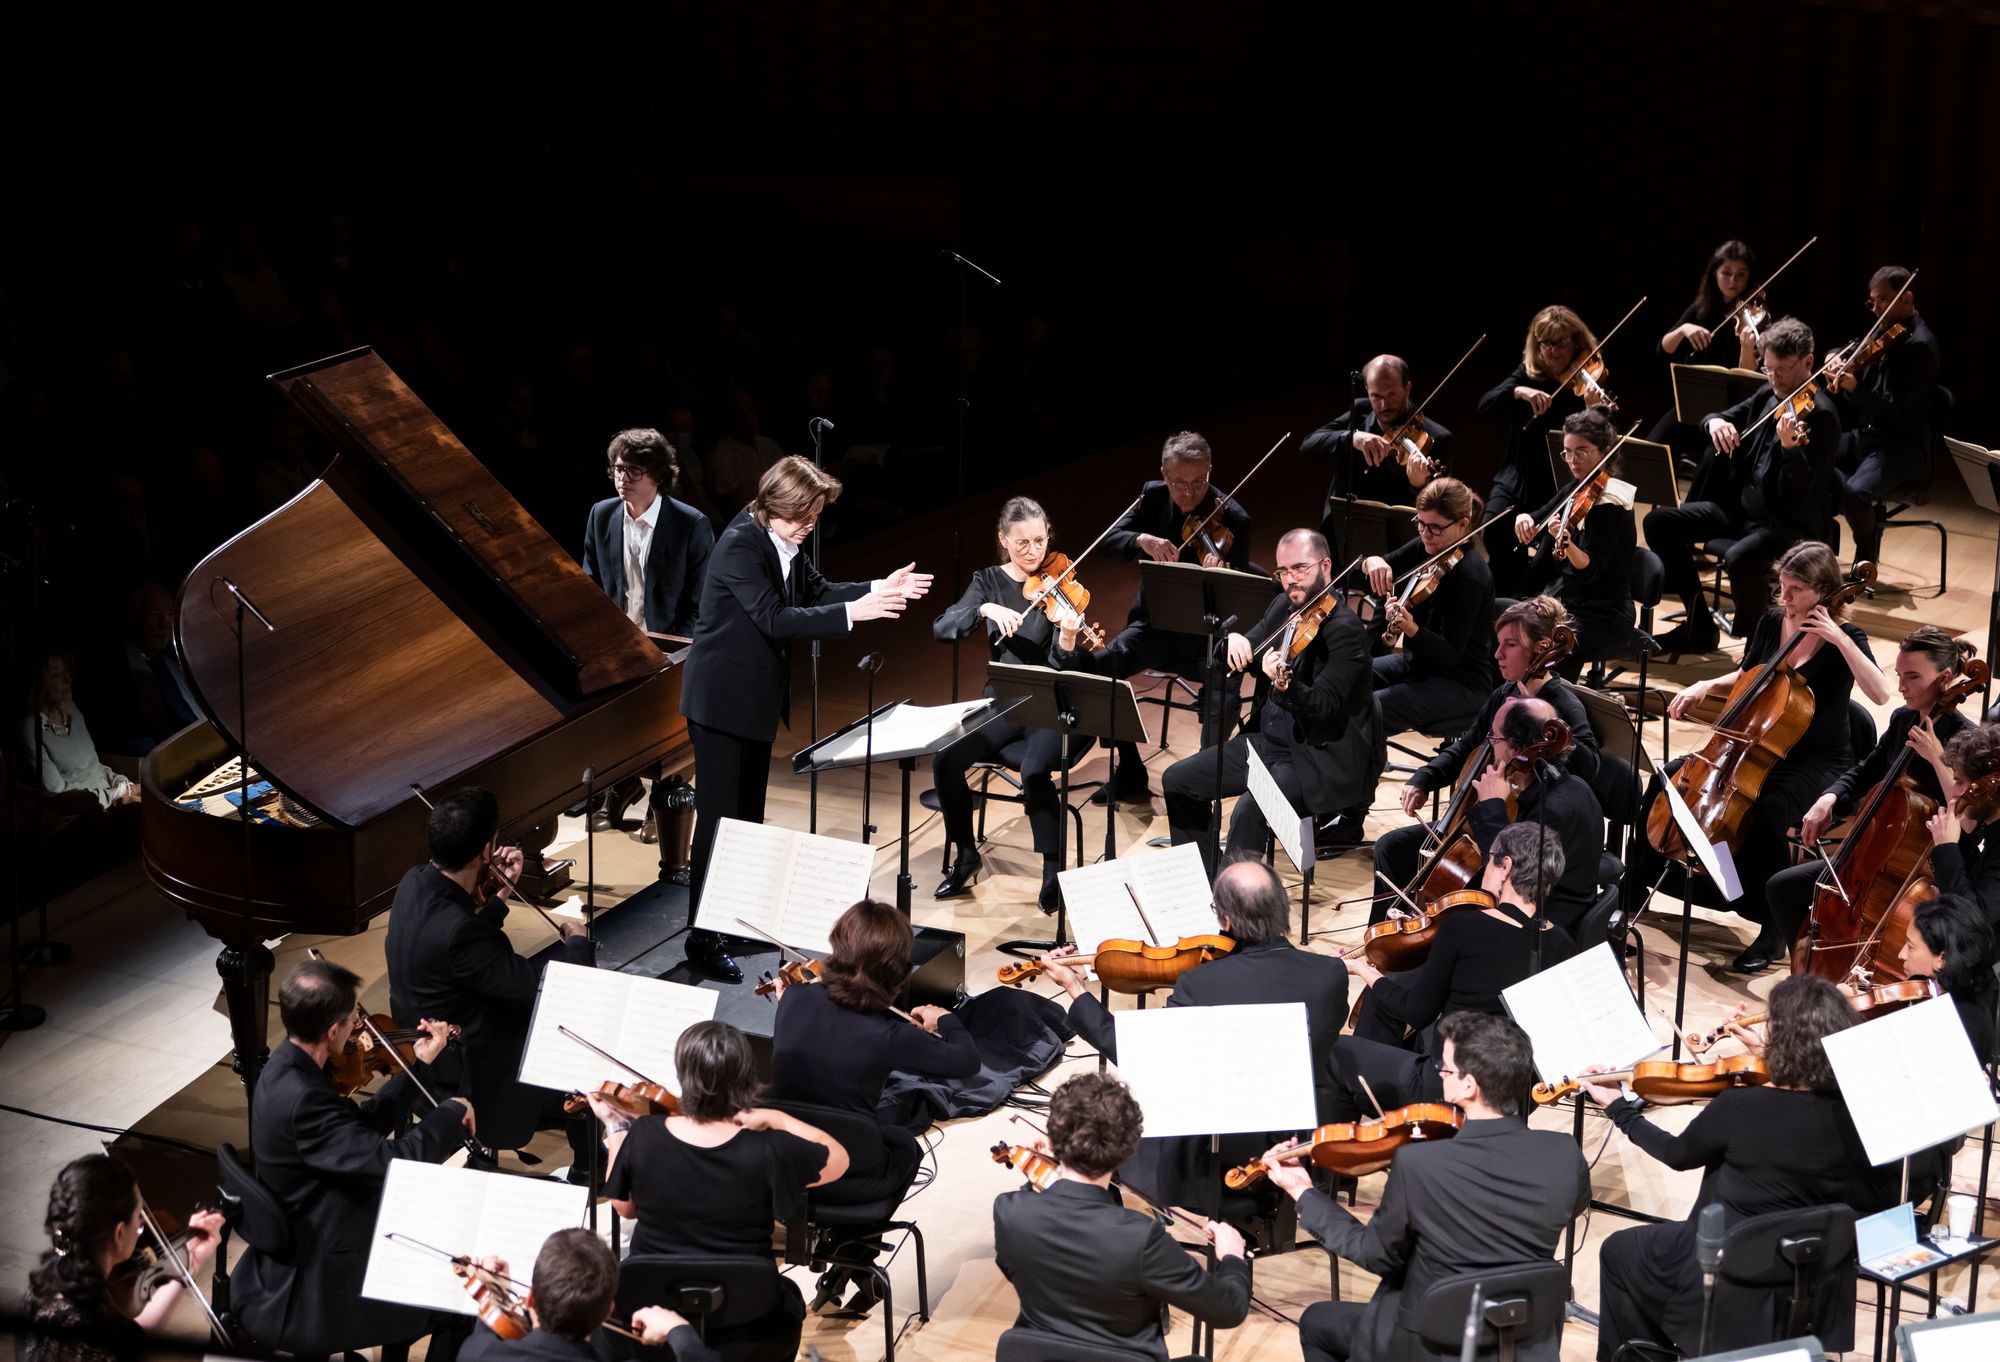 Insula Orchestra's season opener boasts magnificent Farrenc and Beethoven